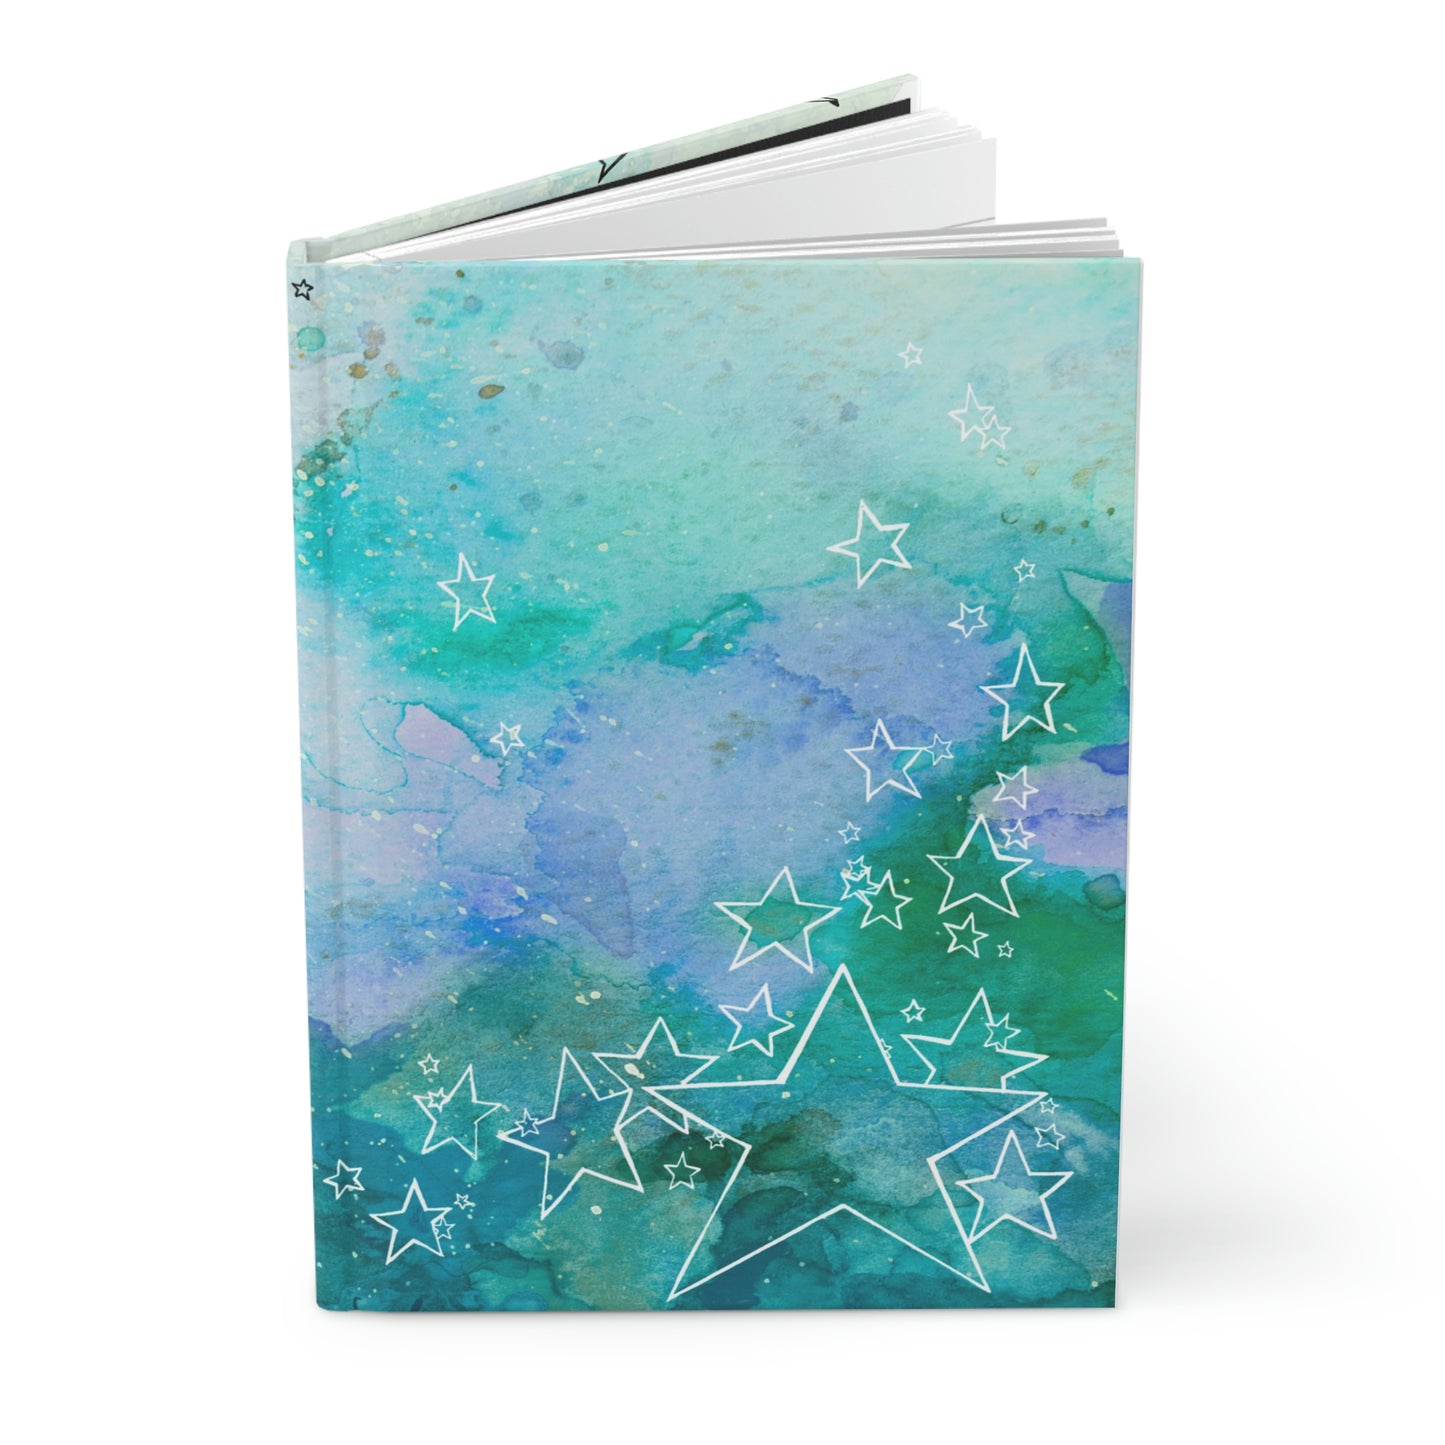 Celestial Seafoam Star Power Journal: For Expressing your Creativity